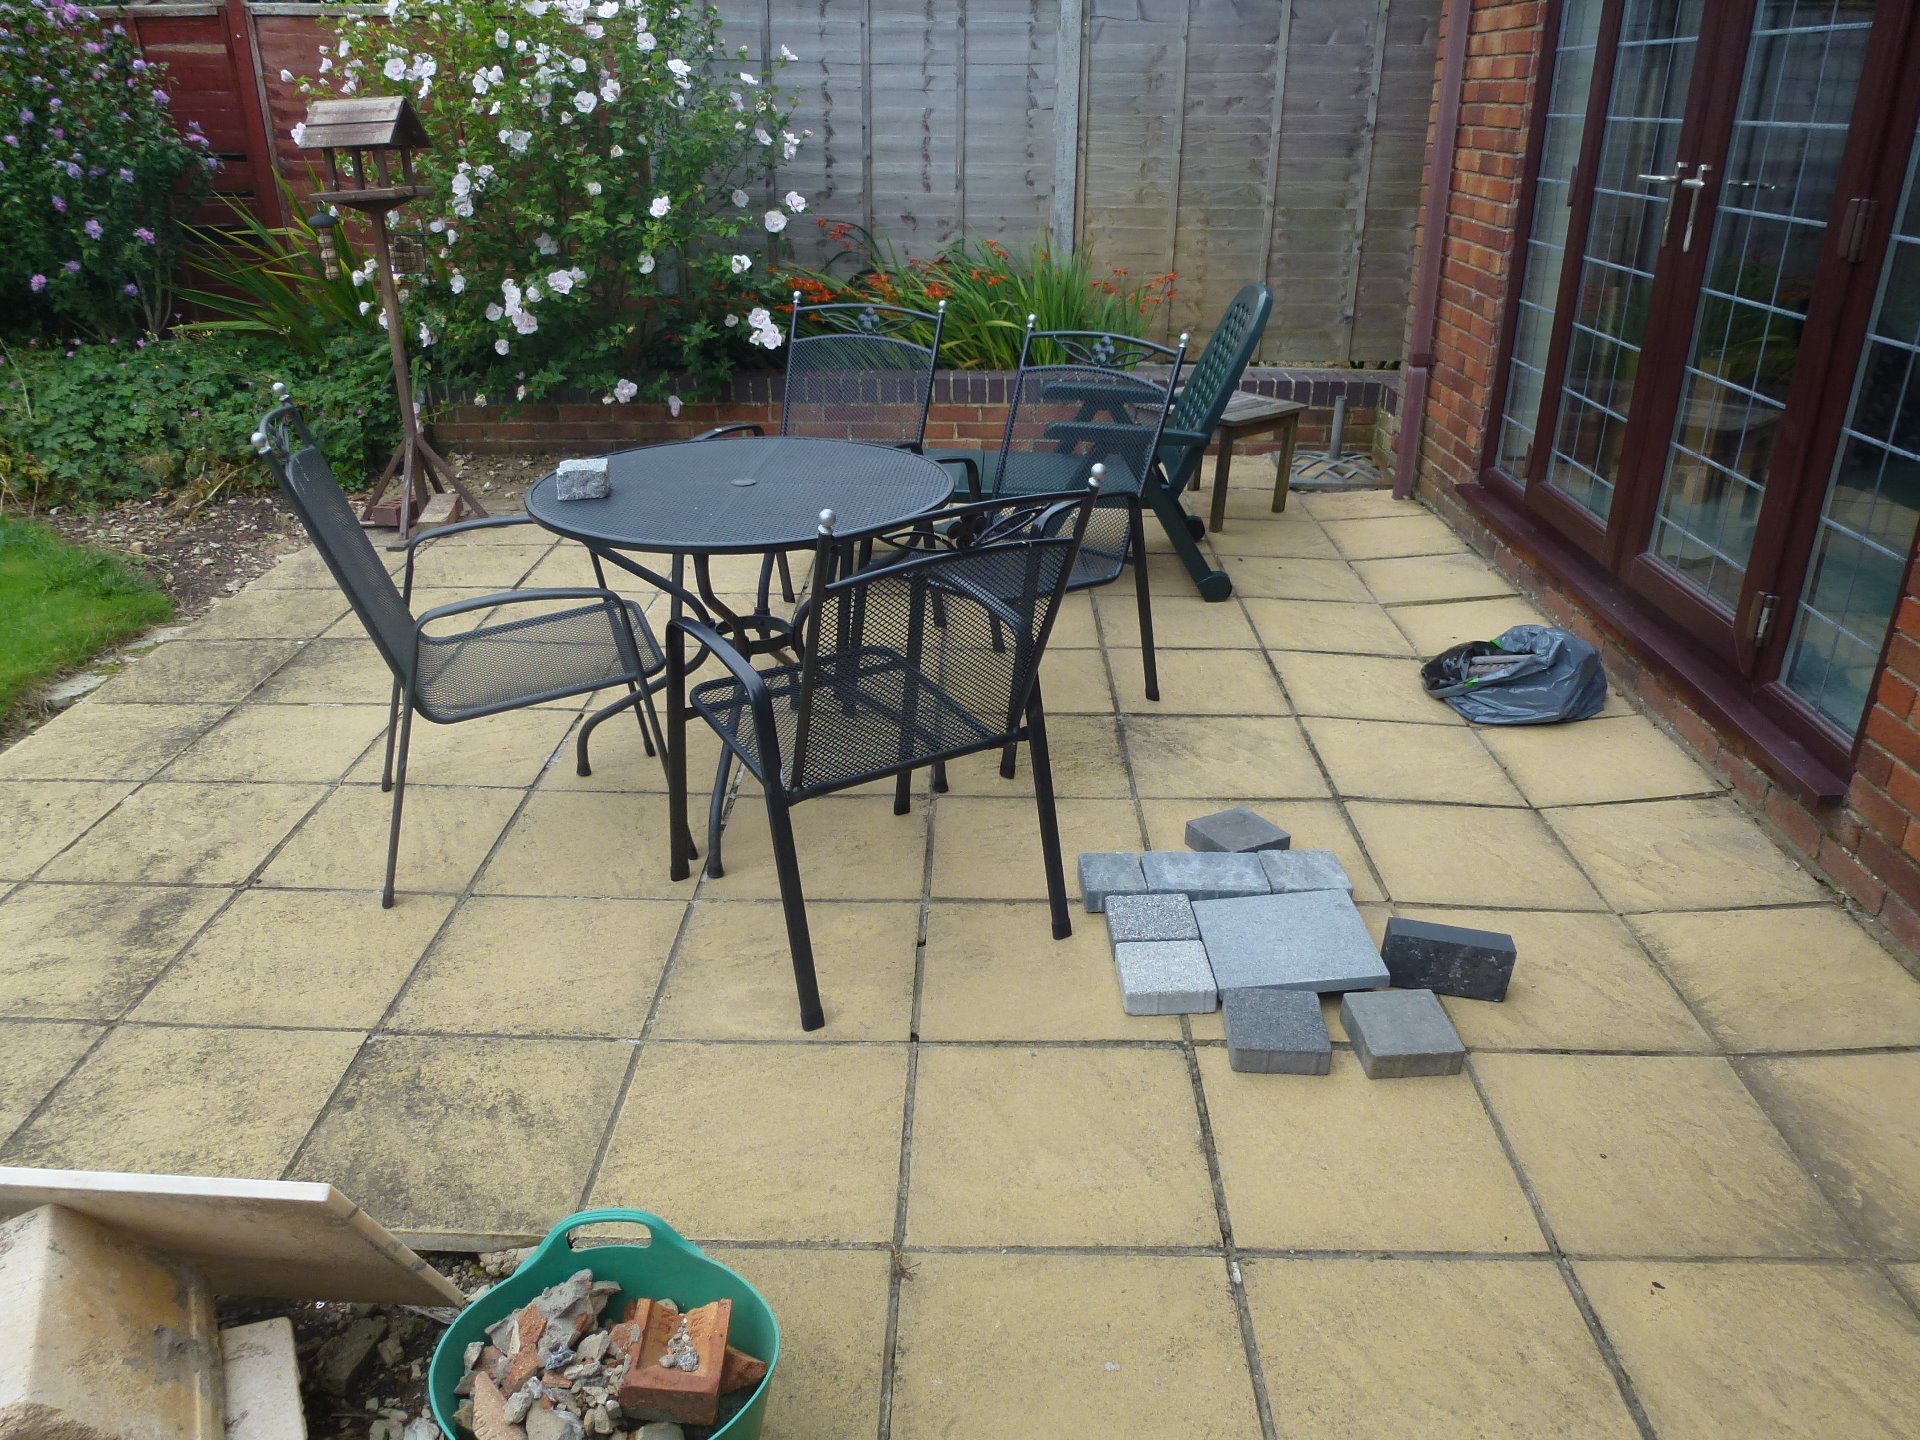 An existing patio in need of a new design